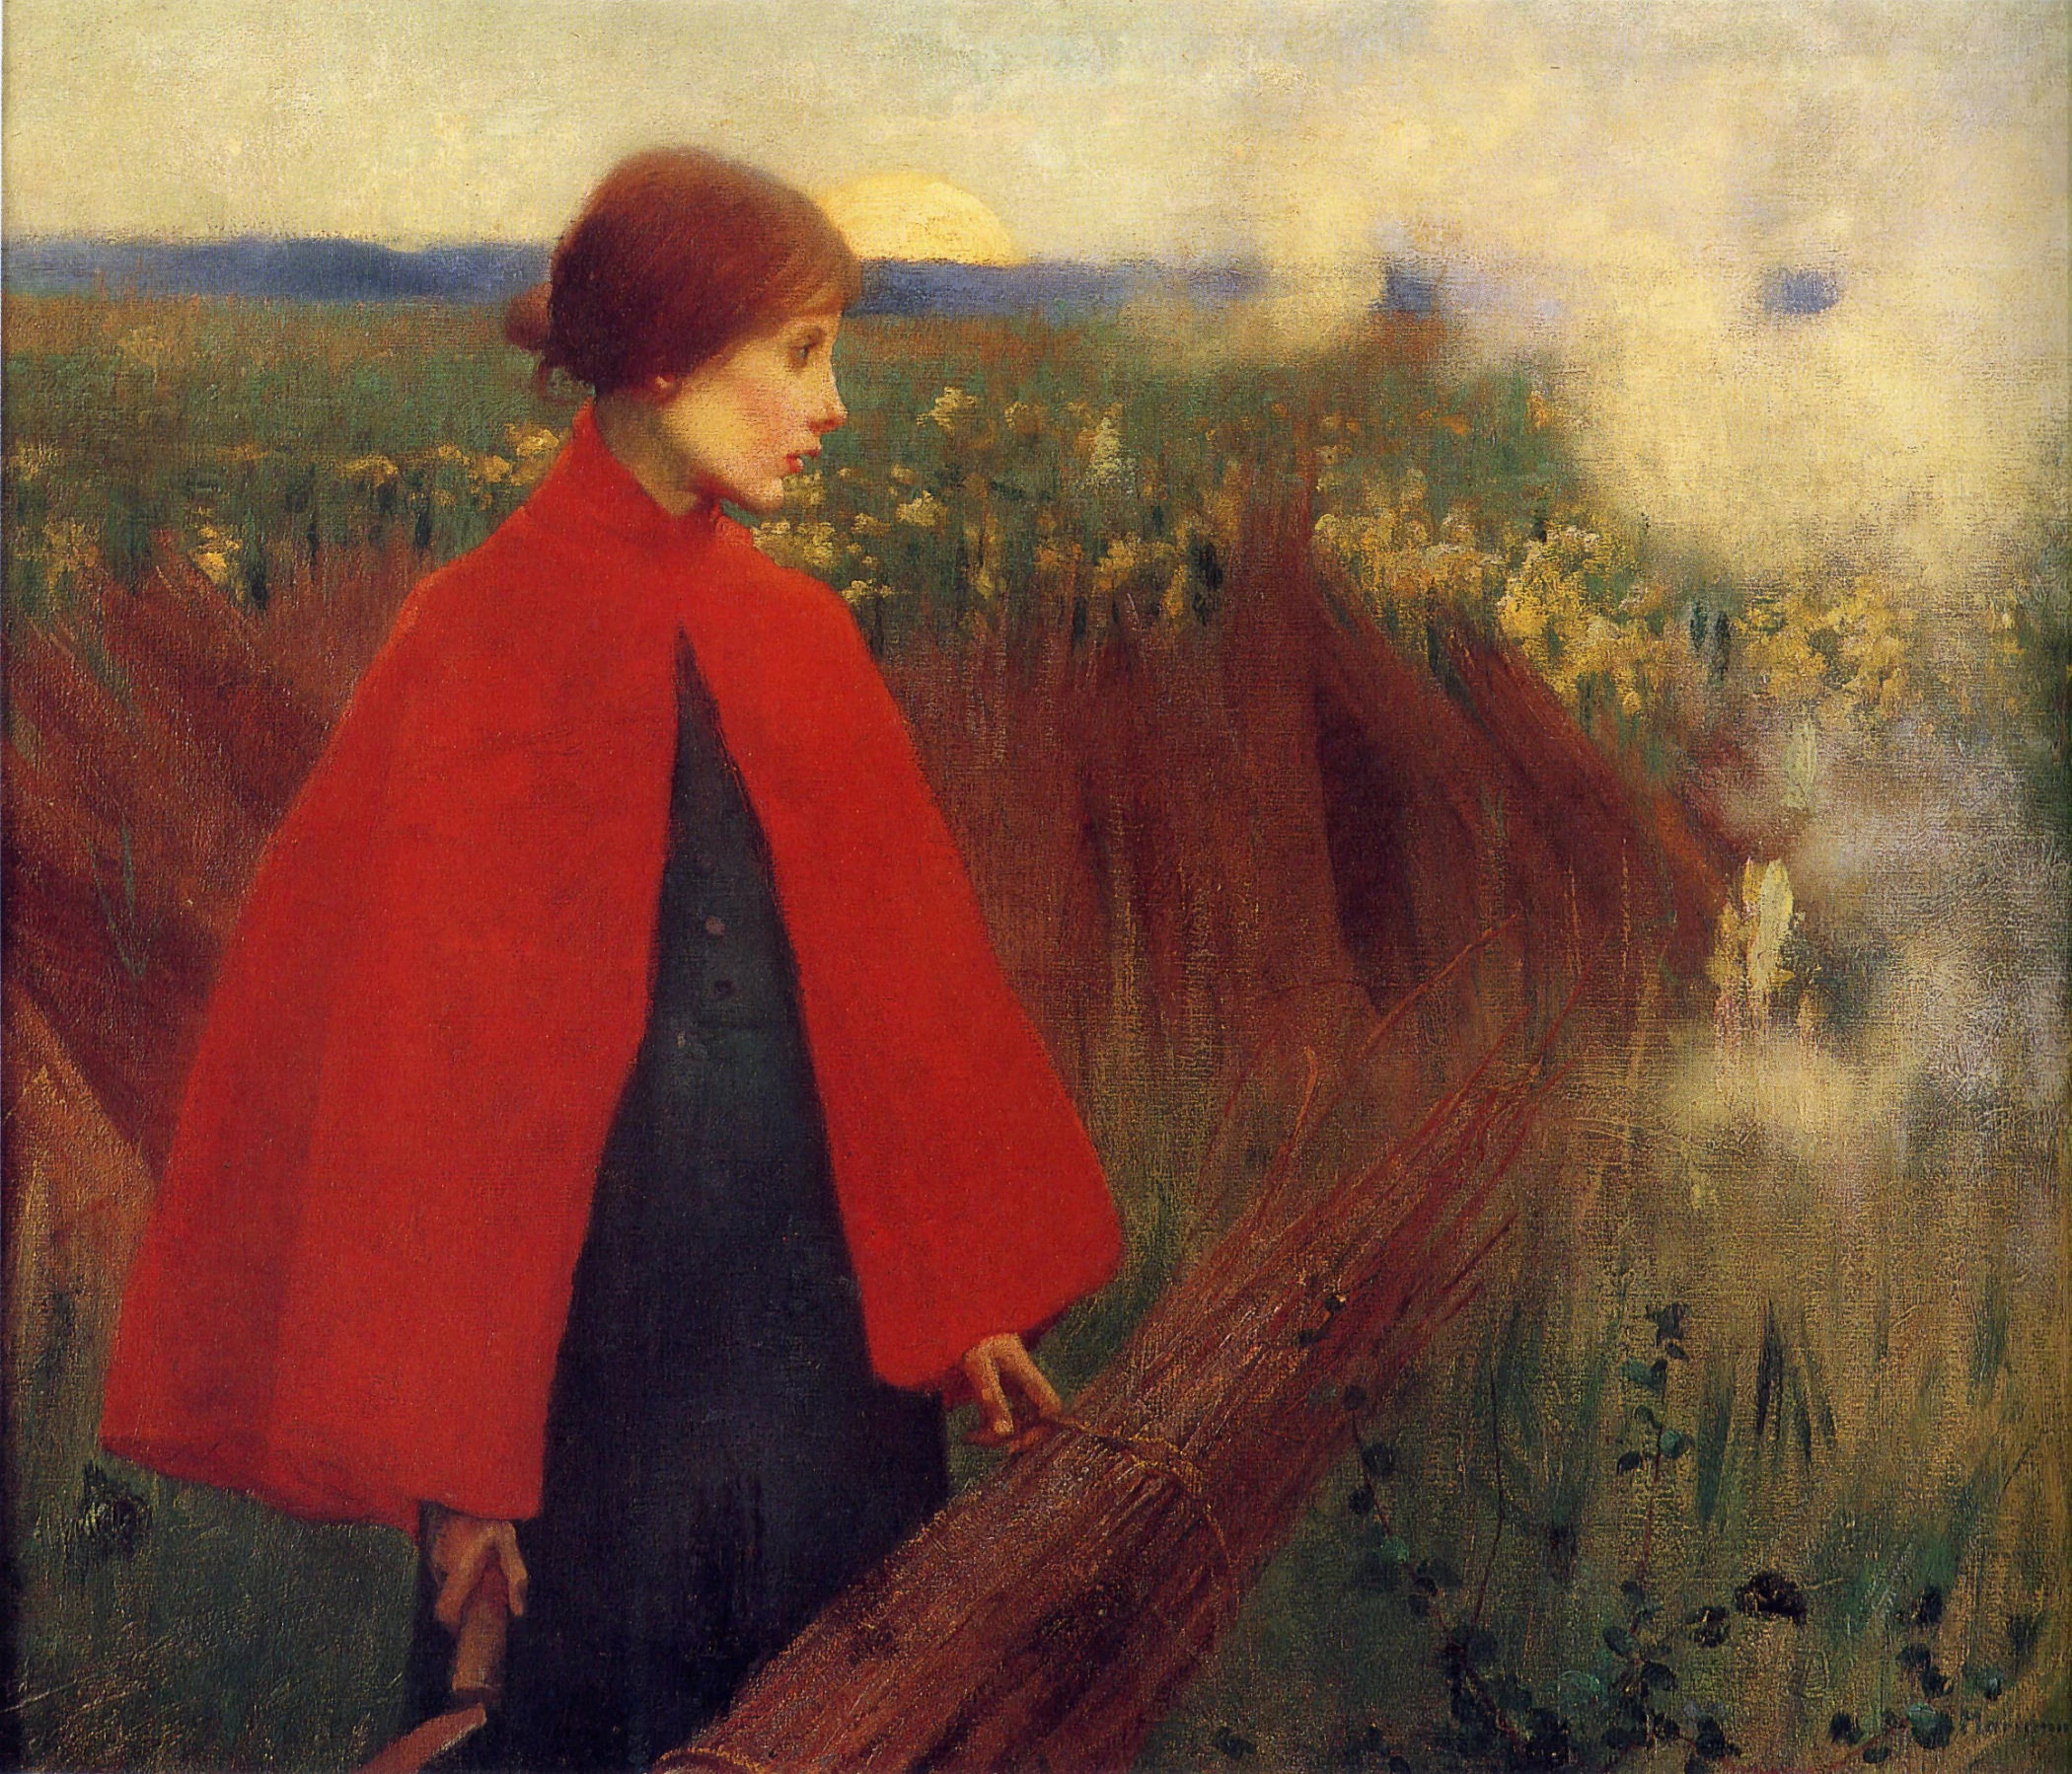 The Passing Train, Marianne Stokes